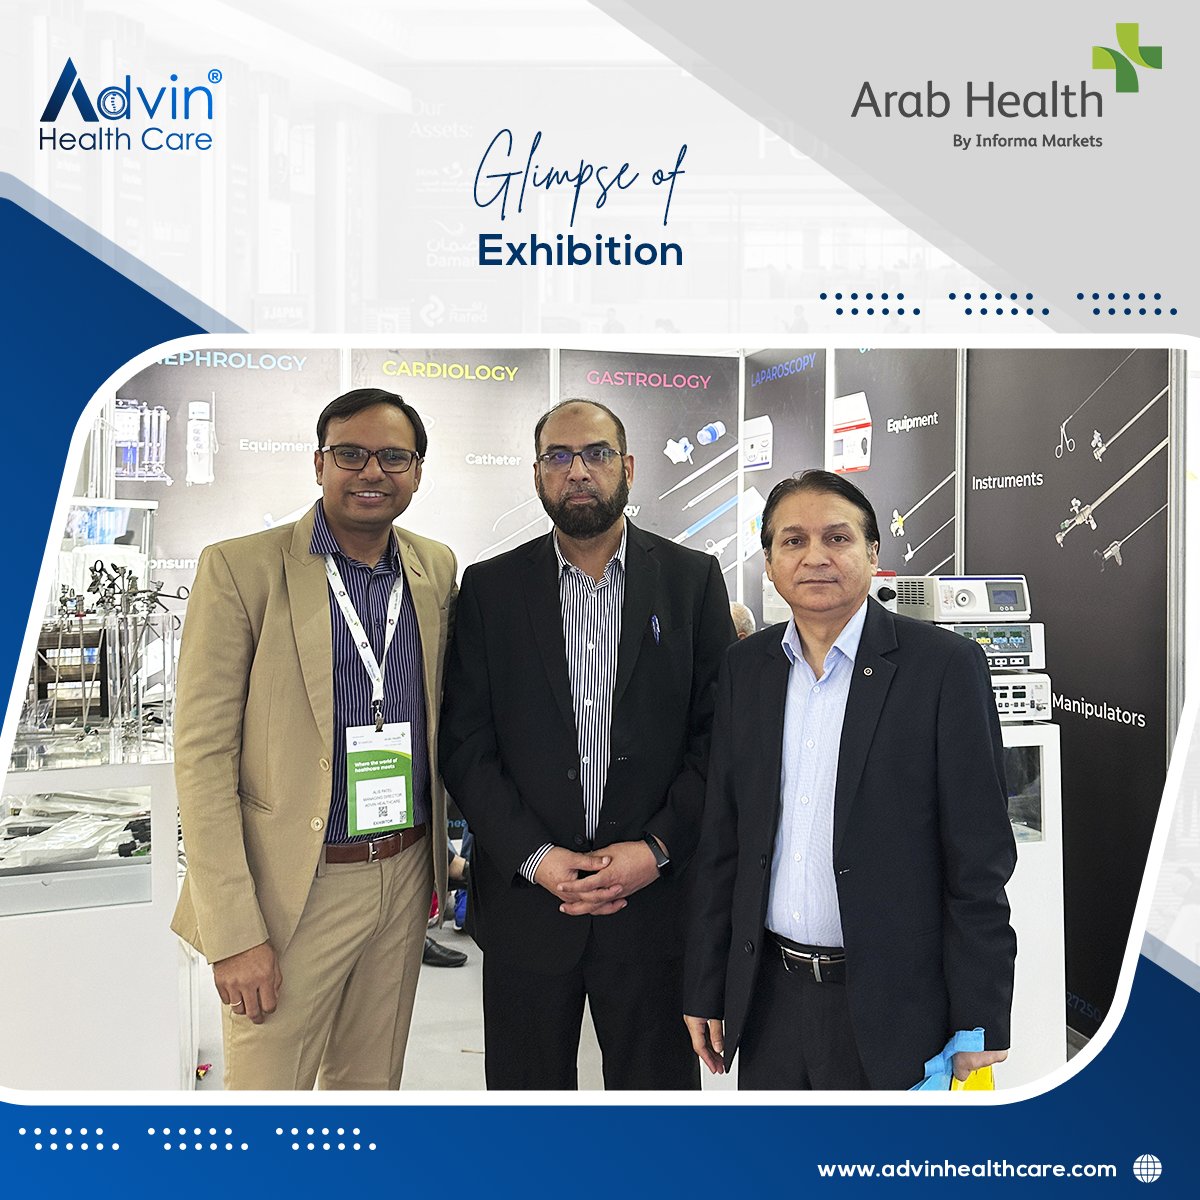 Arab Health 2024 - Glimpse of Exhibition

Email: exports@advinhealthcare.com
Website: advinhealthcare.com

#arabHealth #arabhealth2024 #arabhealthexhibition #medicalexhibition #arabhealthdubai #medicalproducts #advinhealthcare #advinurology #clients